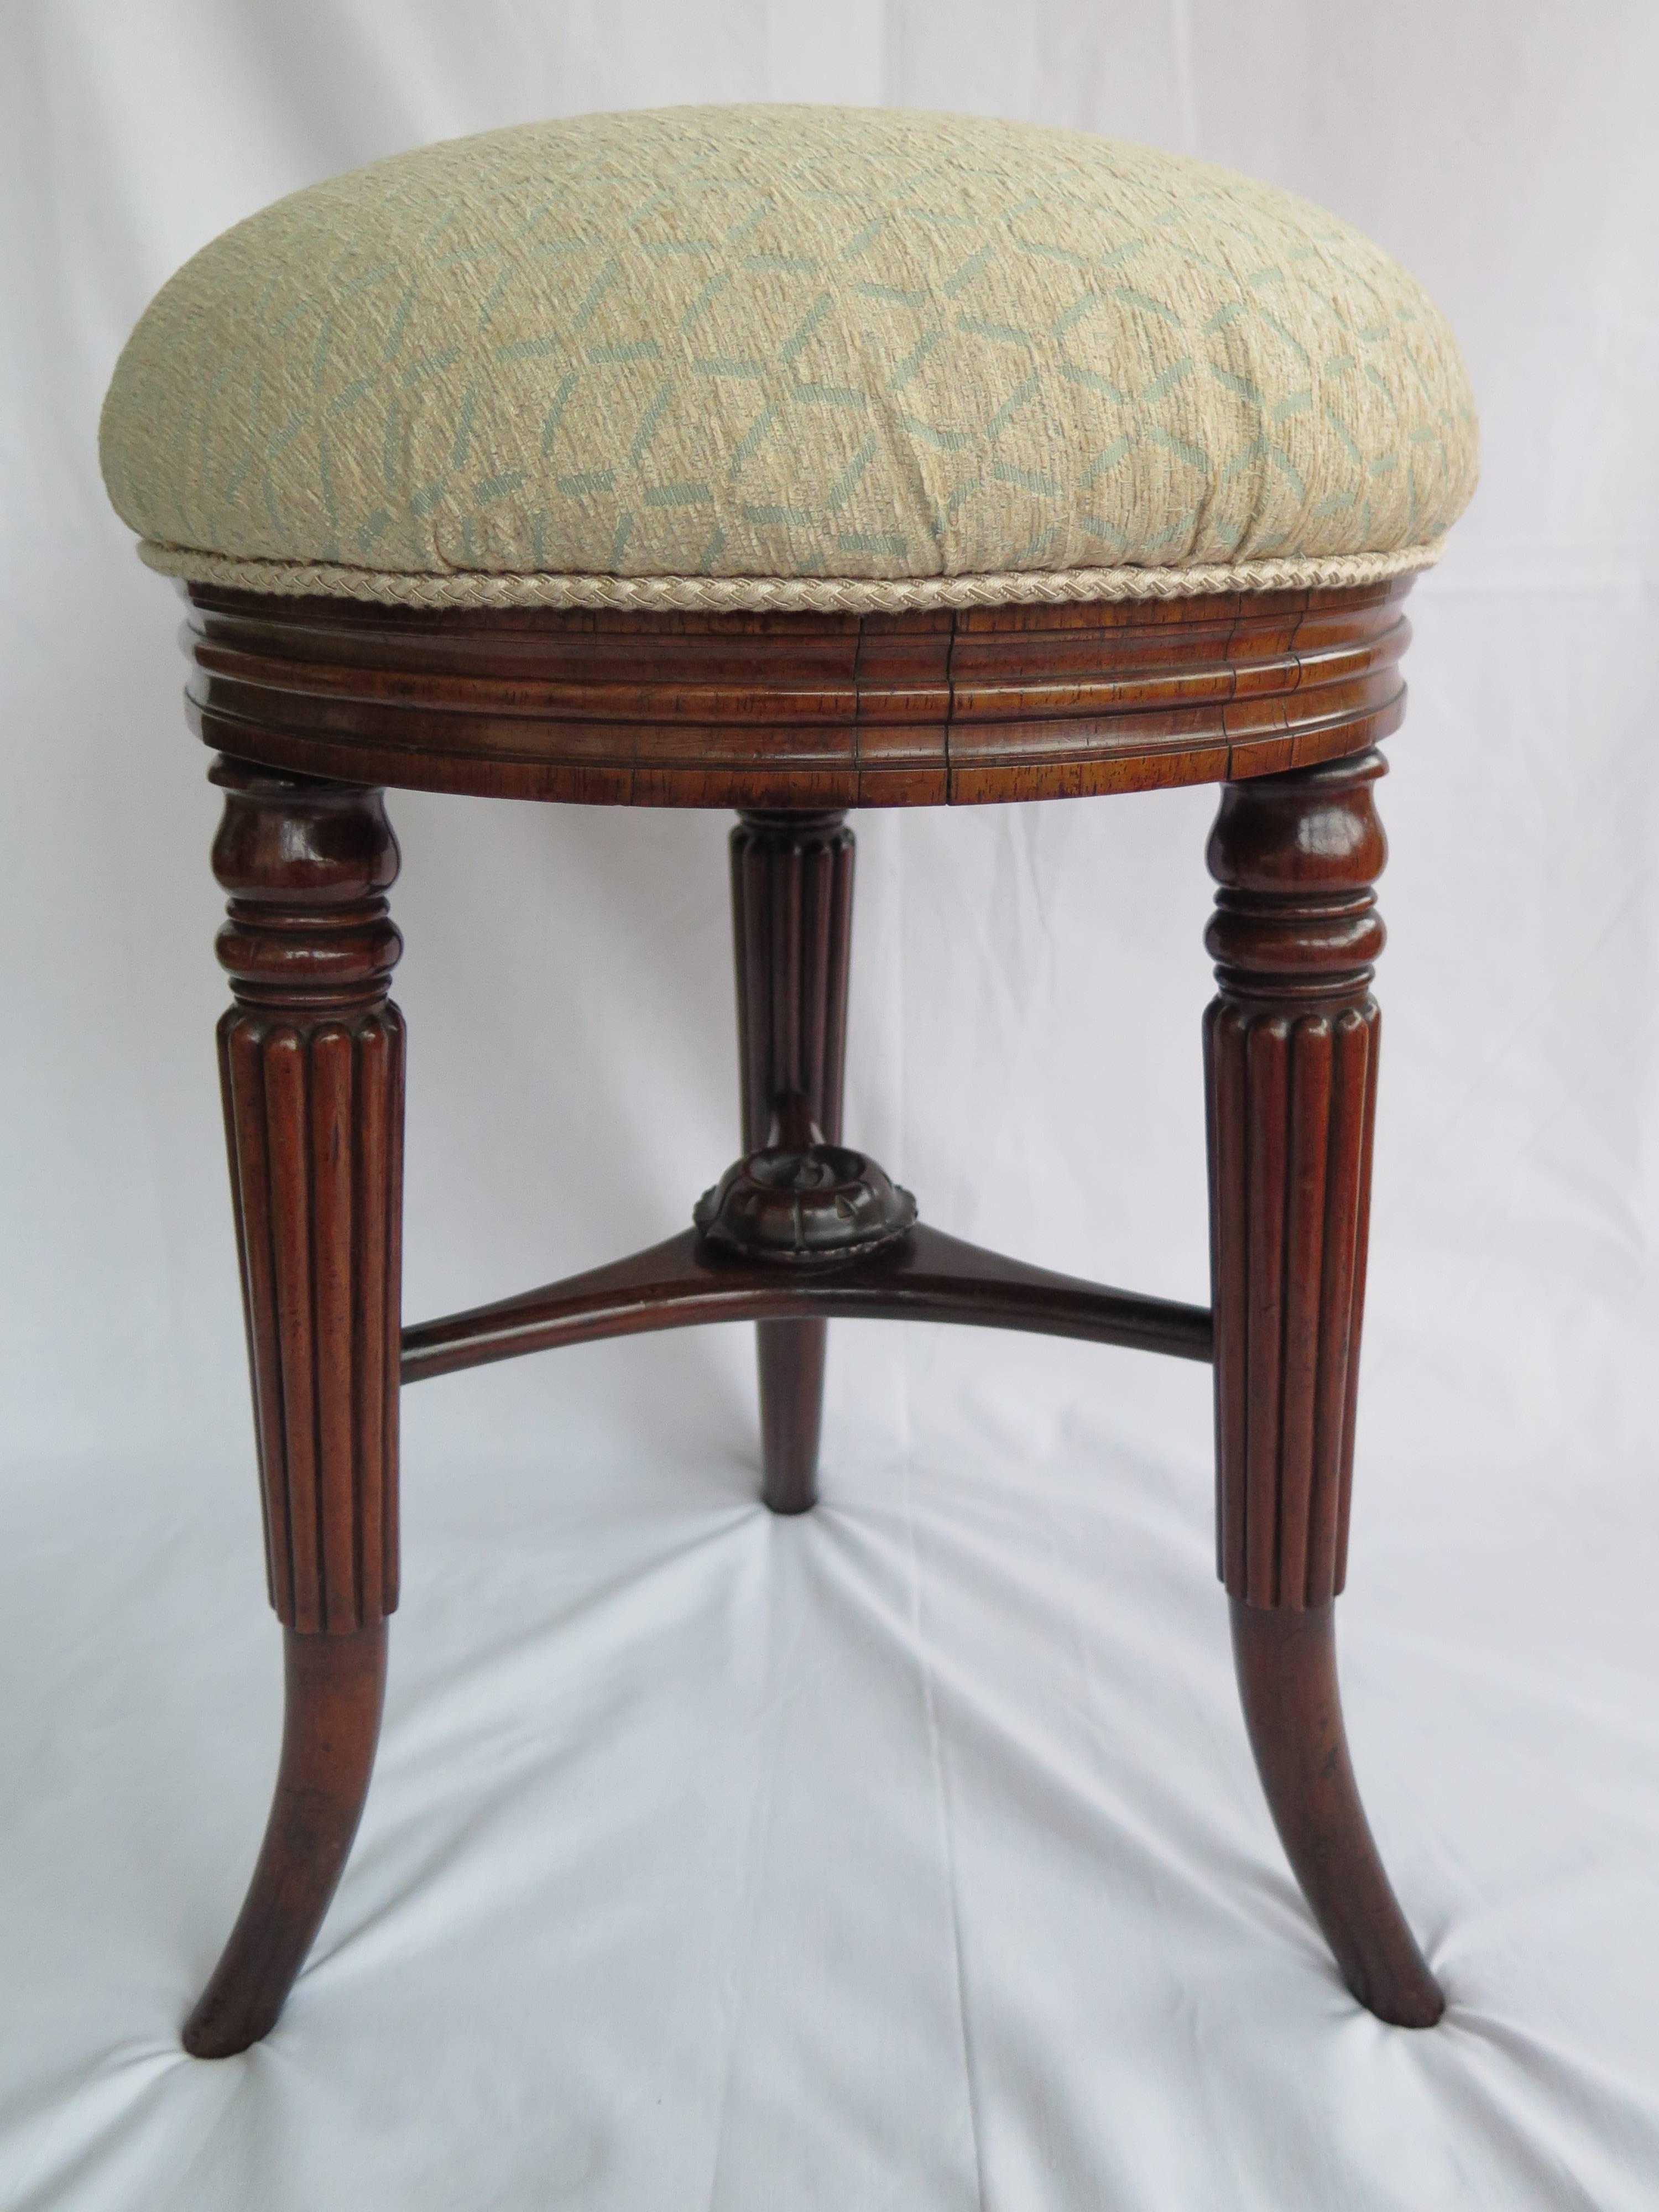 This is an elegant, fine quality STOOL from the English, Early Regency Period, circa 1820, late George 111rd or George 1Vth.

The circular stool is made of solid Rosewood with three reeded tapered legs, outwardly splayed towards the foot.The legs